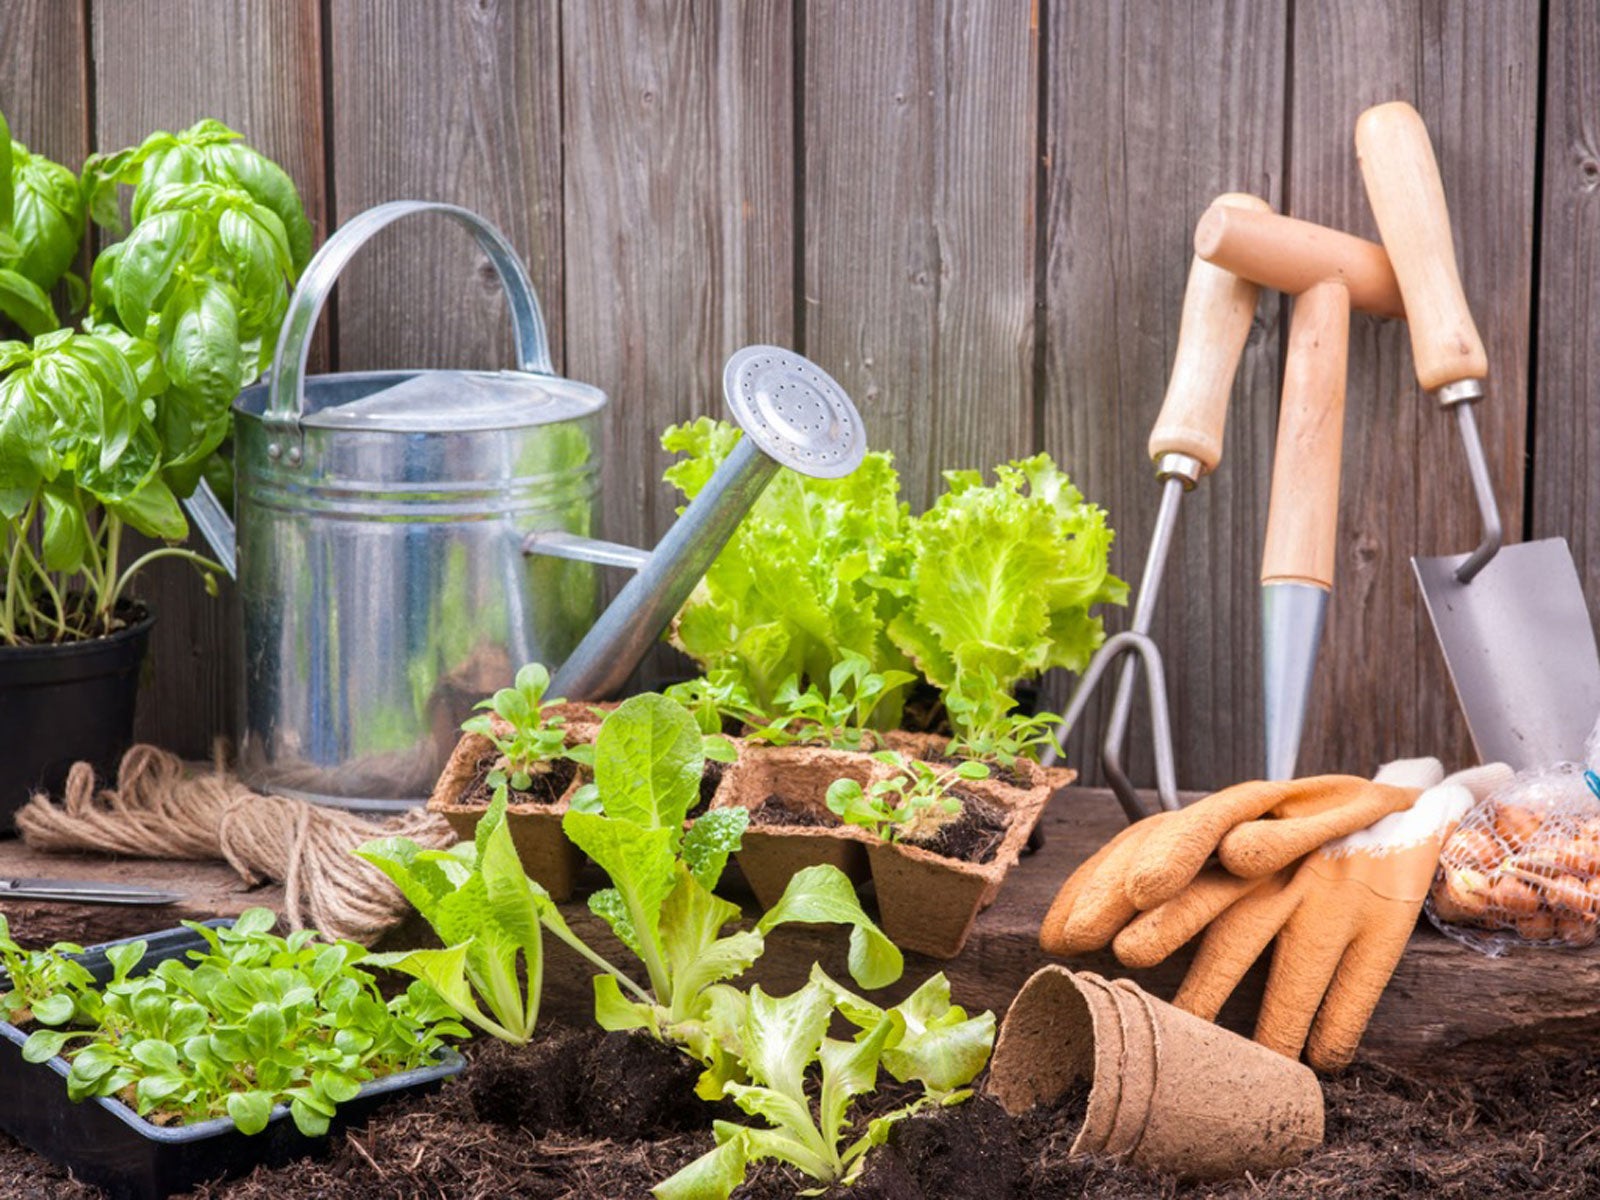 Gardening For Beginners – Starting A Garden At Home The First Time